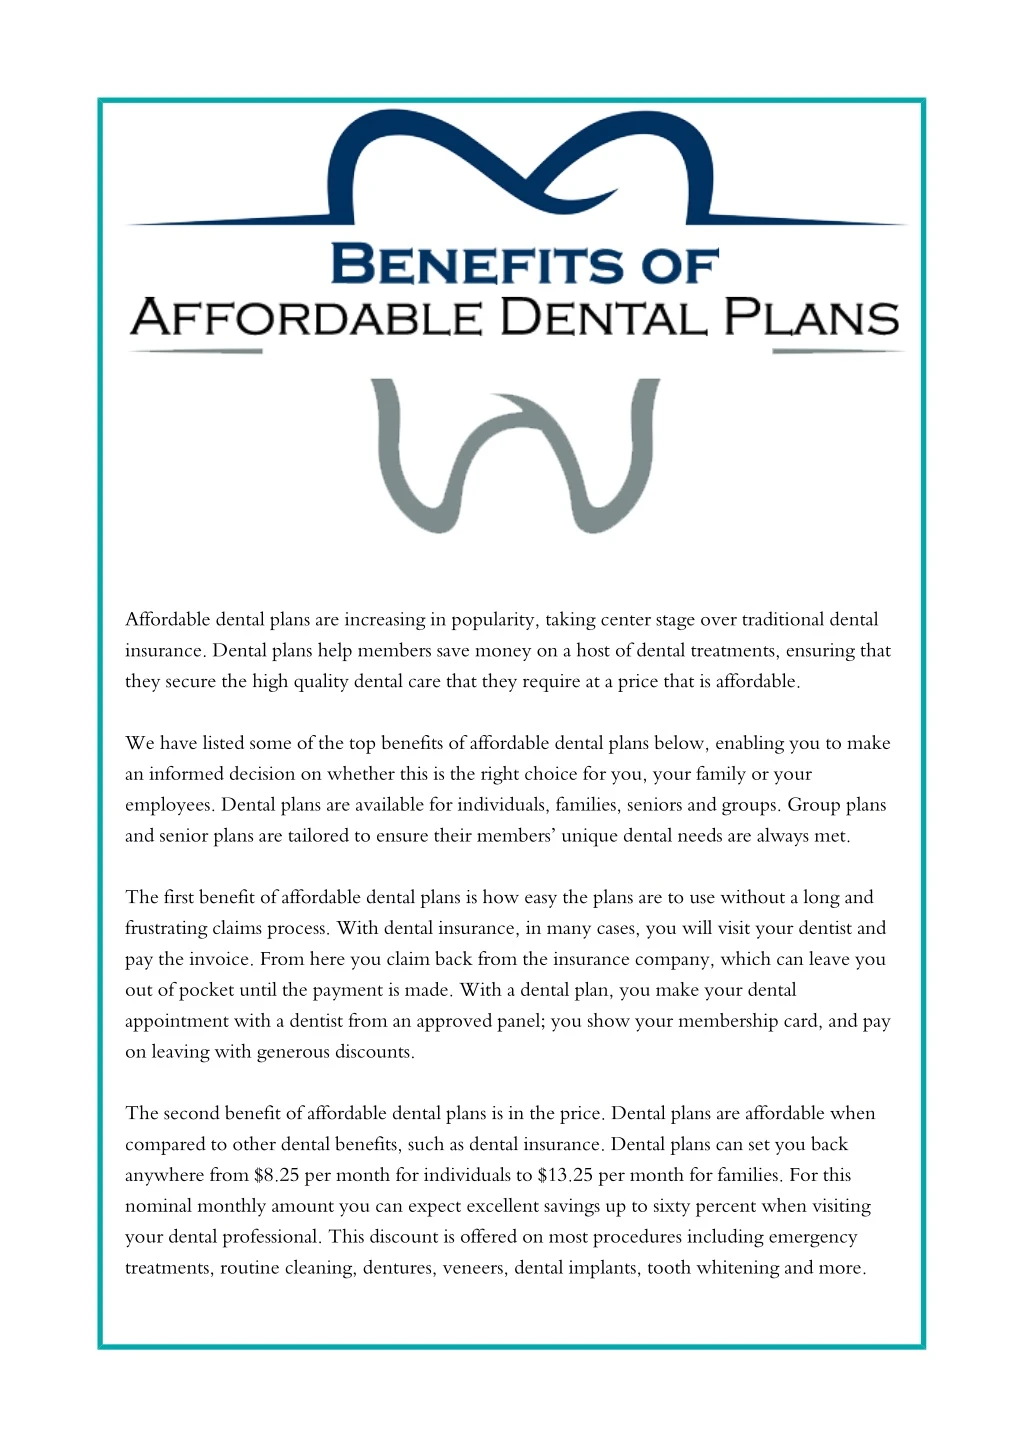 affordable dental plans are increasing